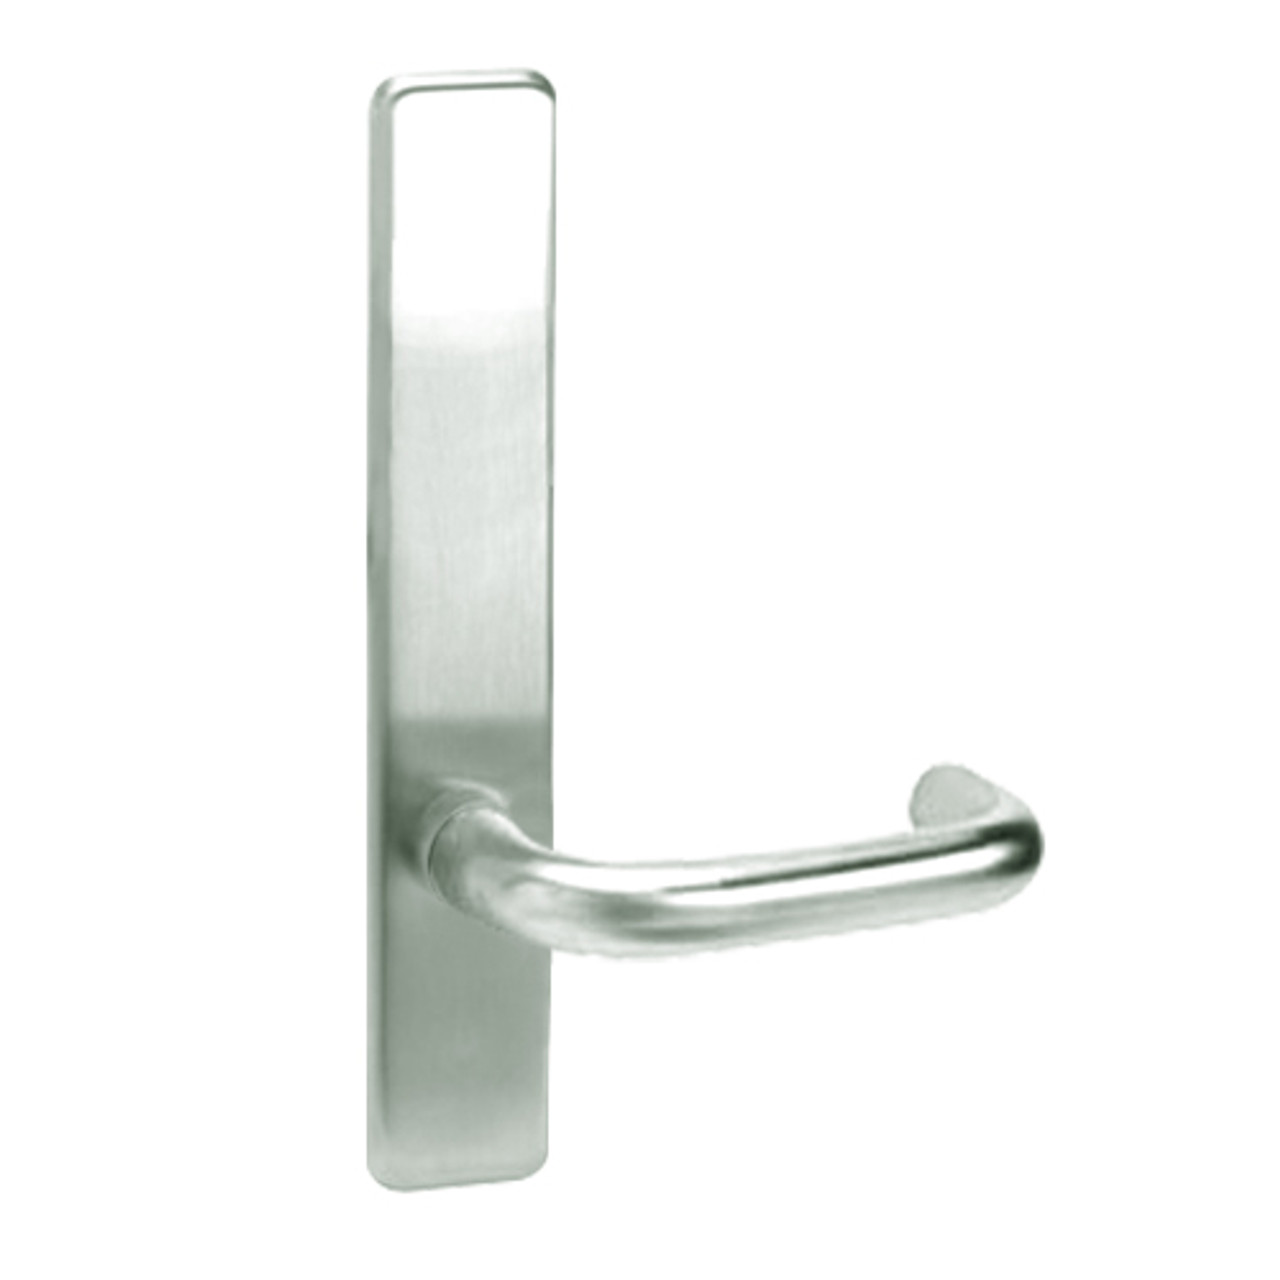 L850-618-LHR Corbin ED4000 Series Exit Device Trim with Dummy Lustra Lever in Bright Nickel Finish